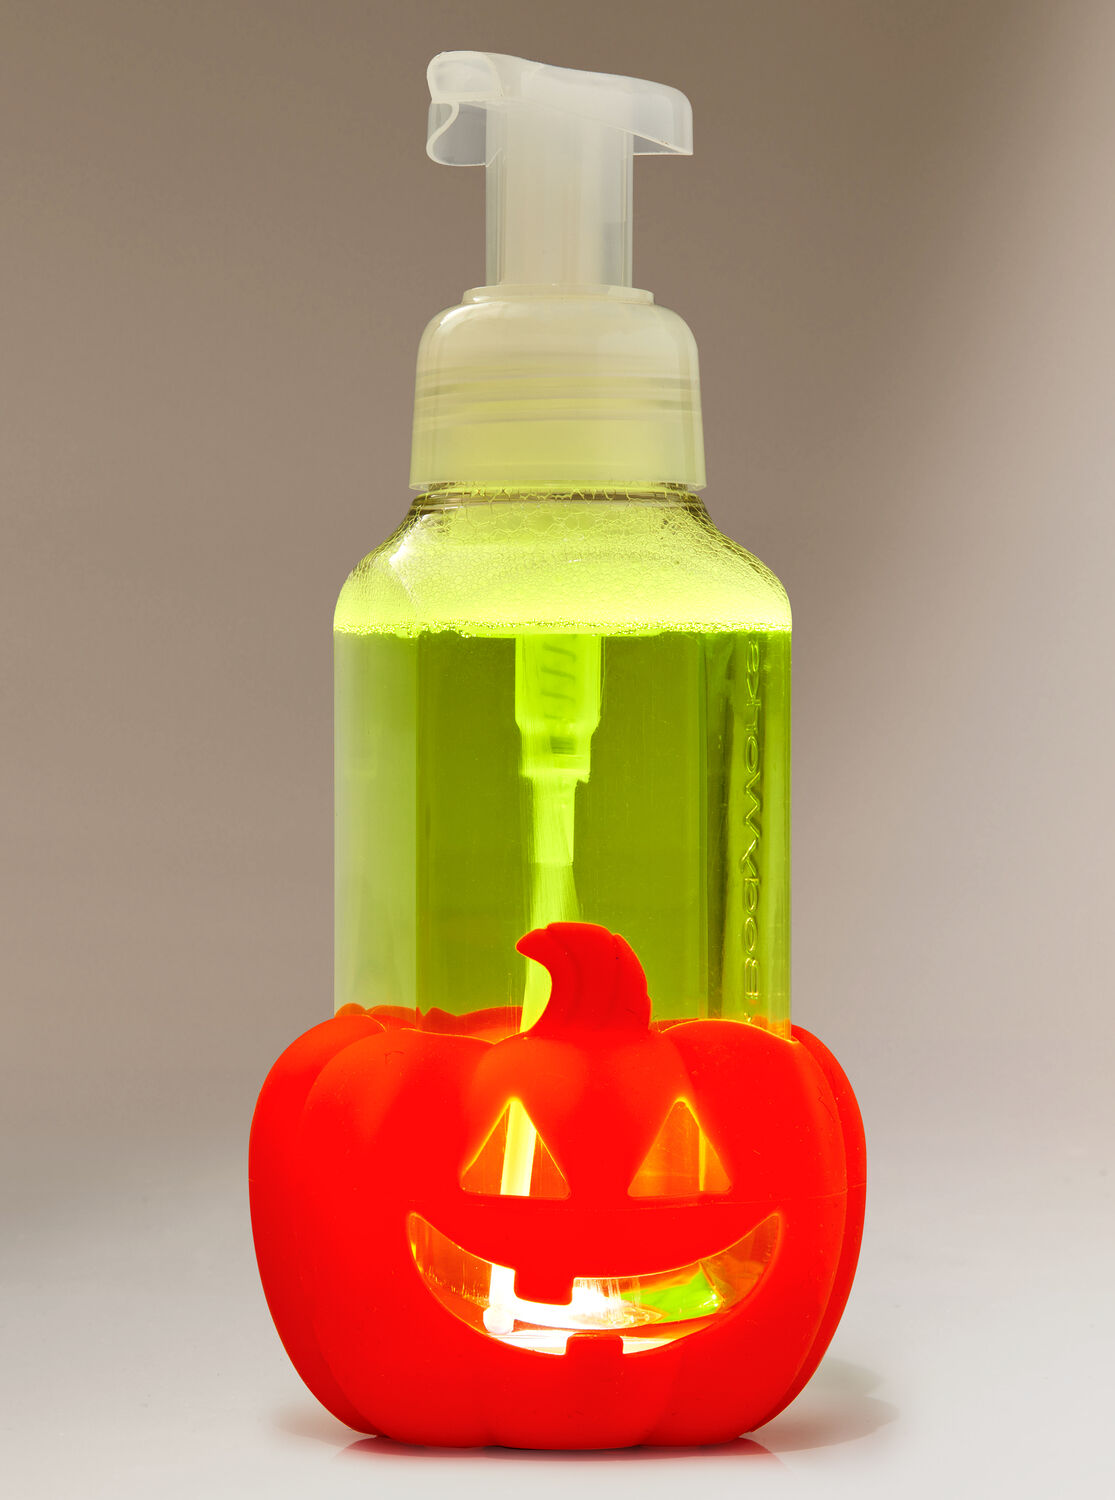 Details about   Bath & Body Works SOAP Sleeve holder Halloween Christmas Holiday Everyday U Pick 